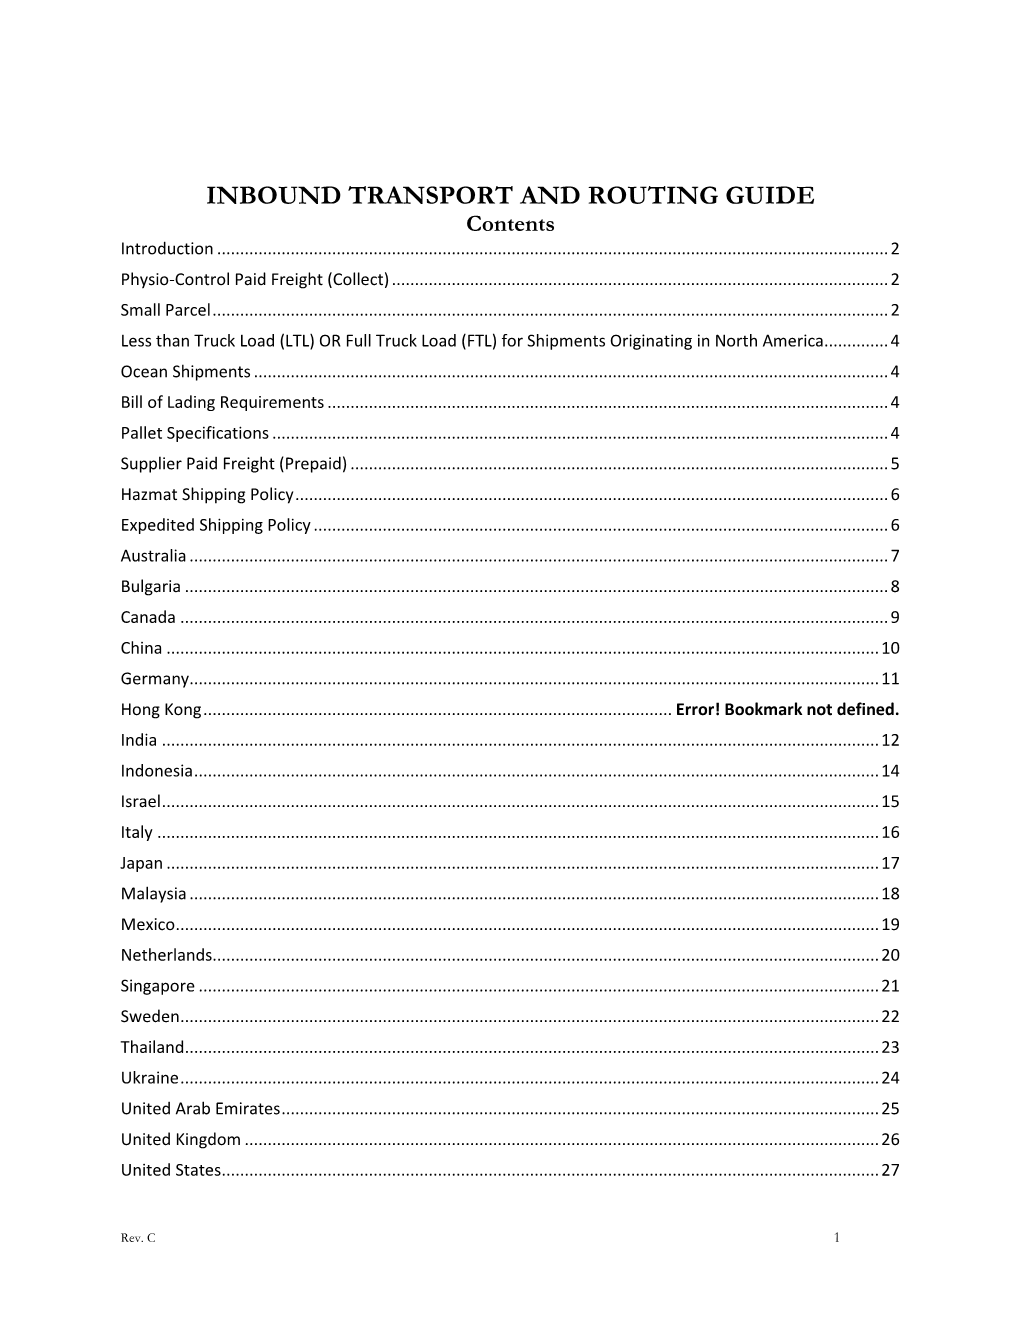 Inbound Transit and Routing Guide